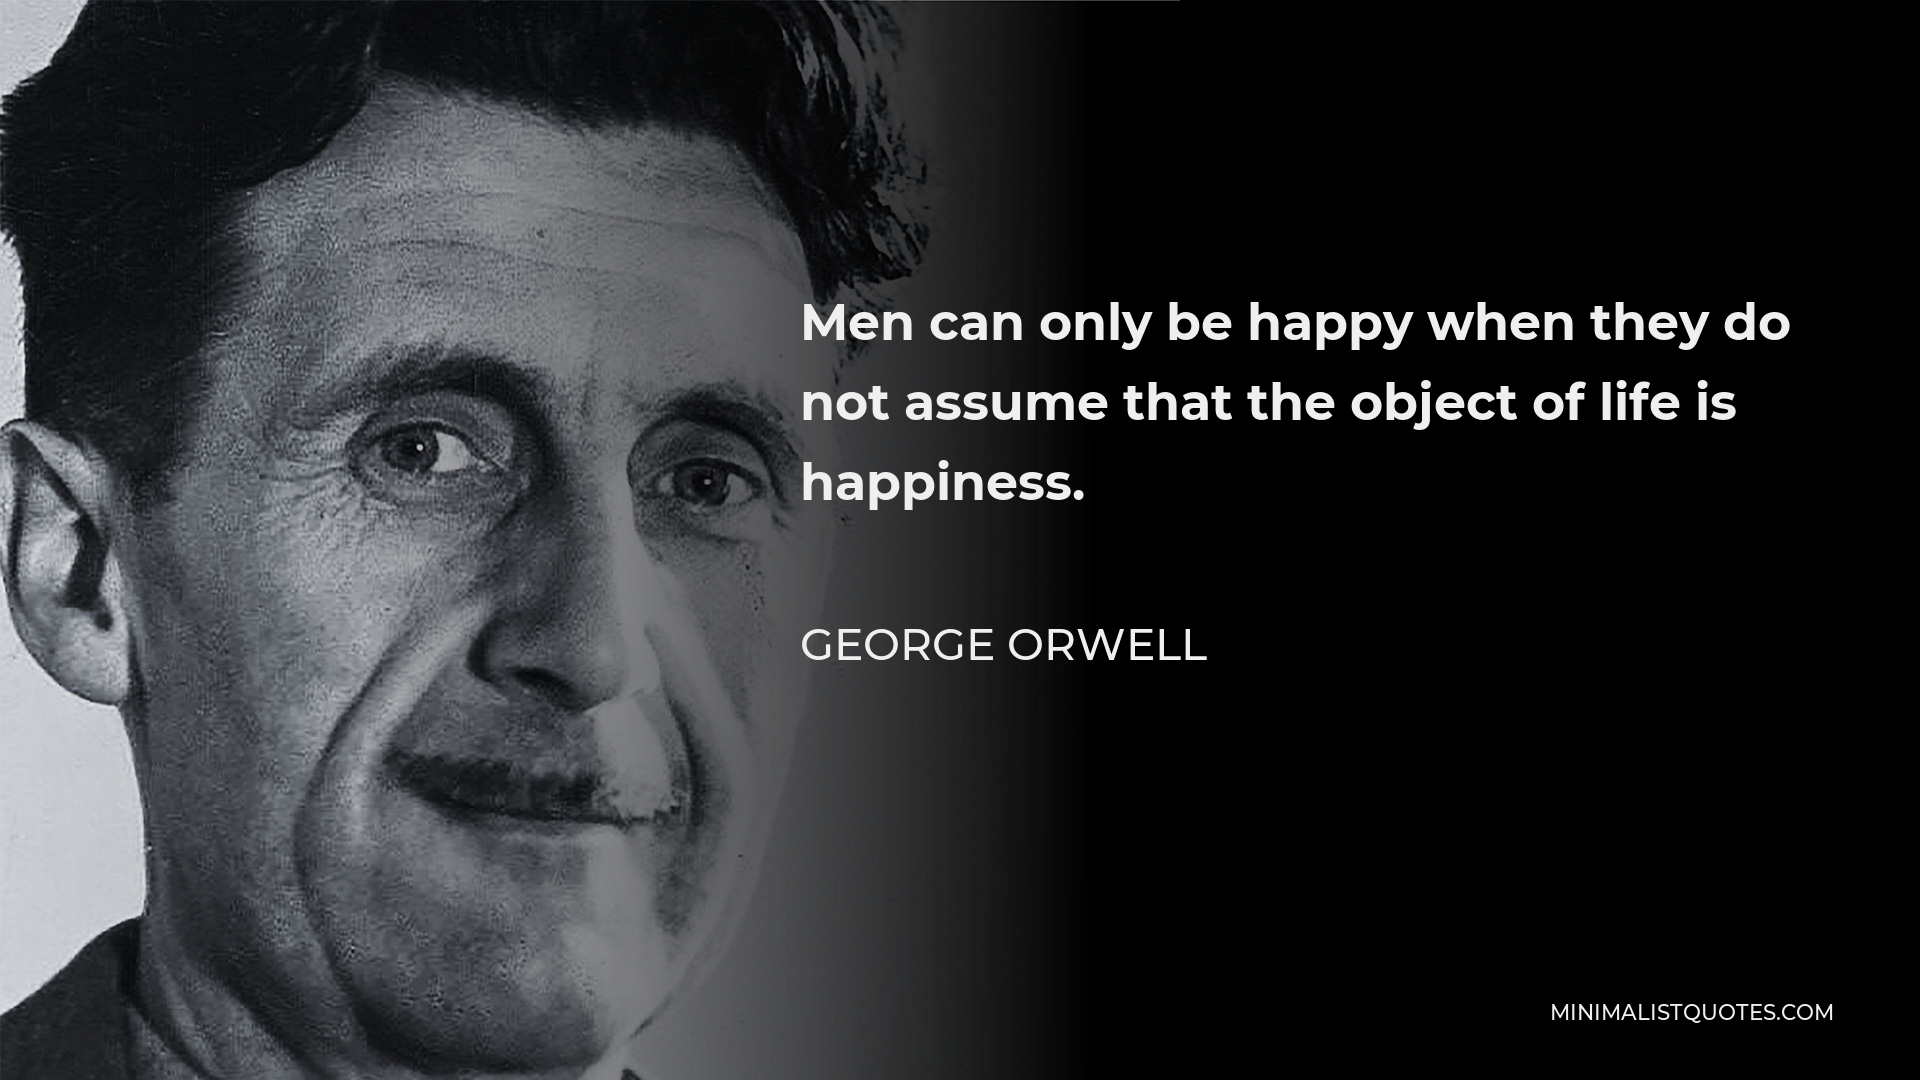 George Orwell Quote - Men can only be happy when they do not assume that the object of life is happiness.